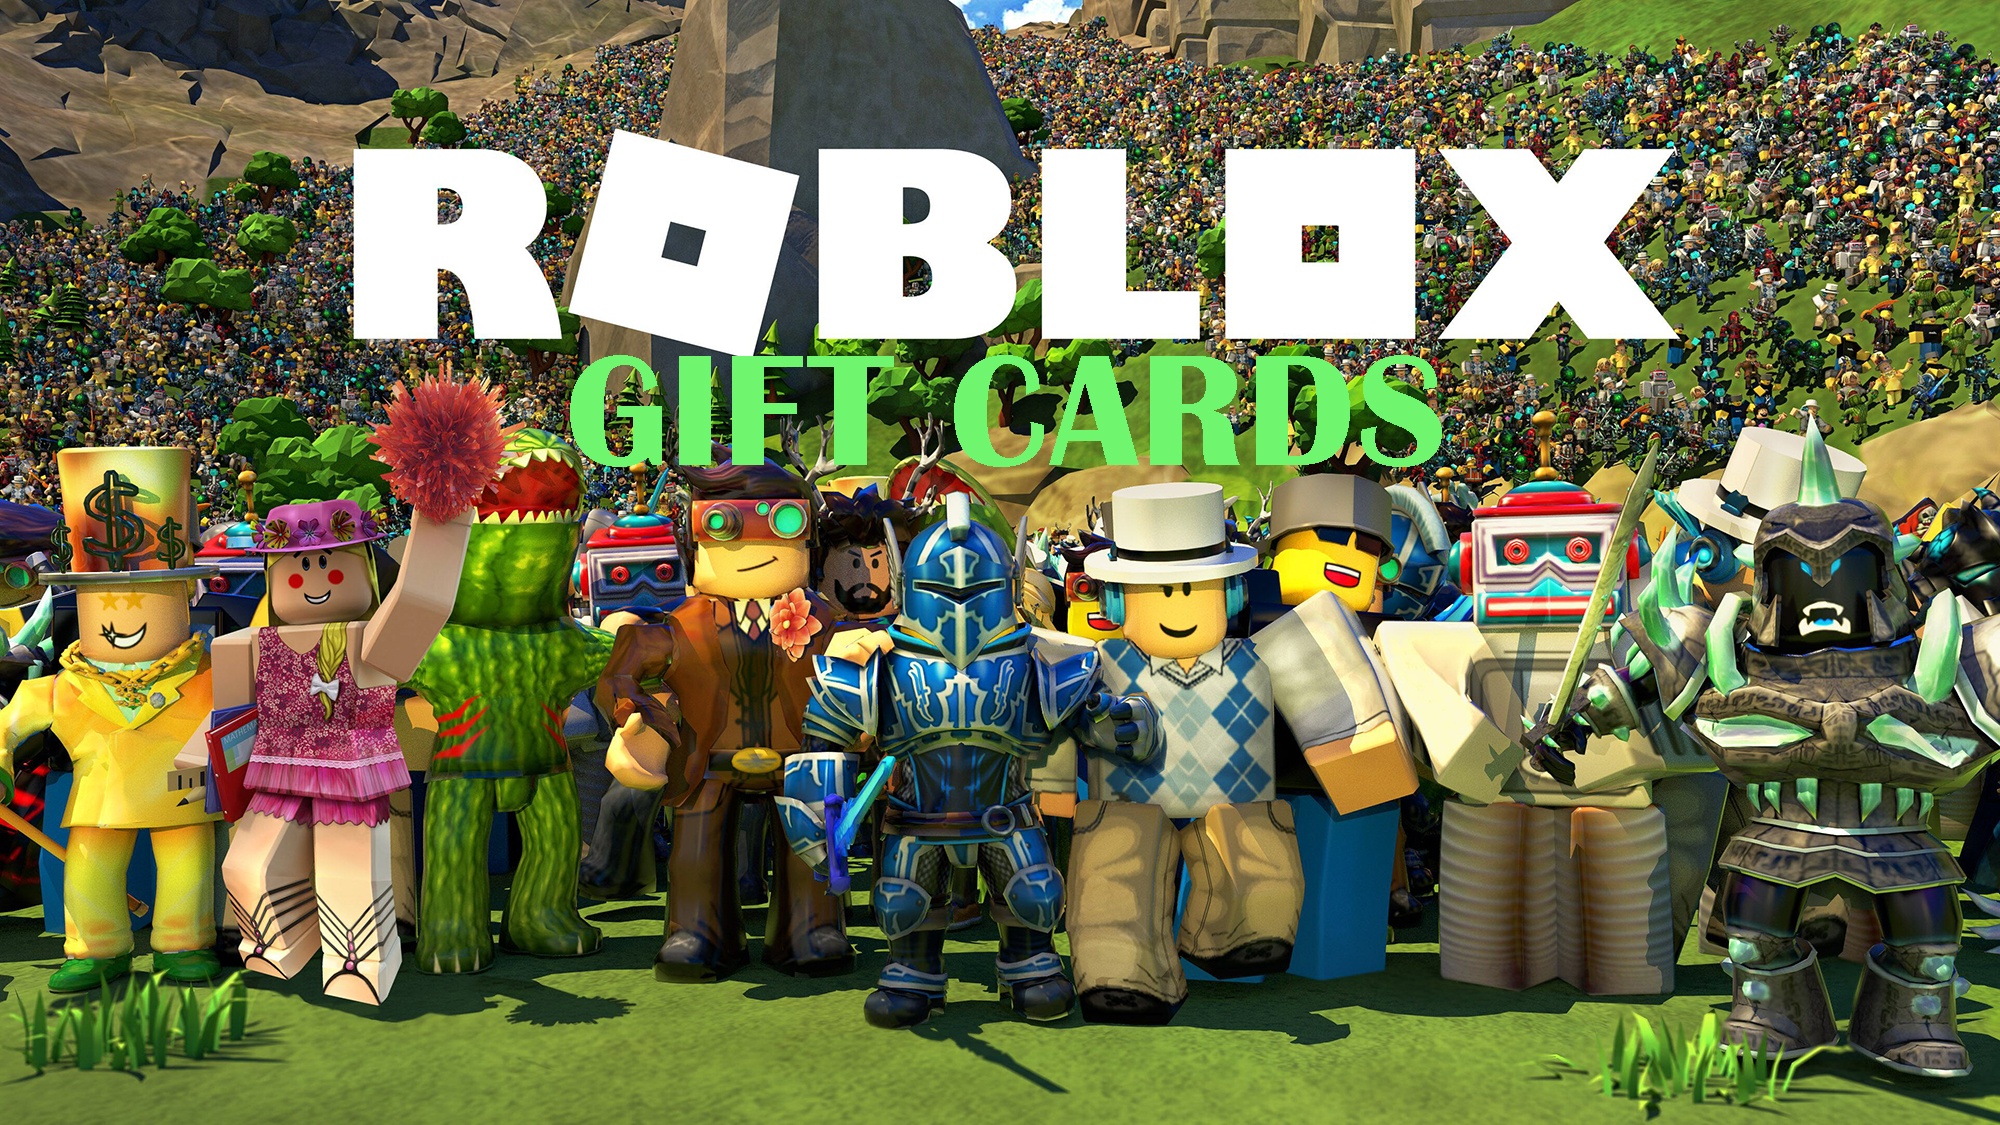 How To Get Free Roblox Gift Card Codes Unused No Survey Super Easy - roblox gift card redeem codes unused